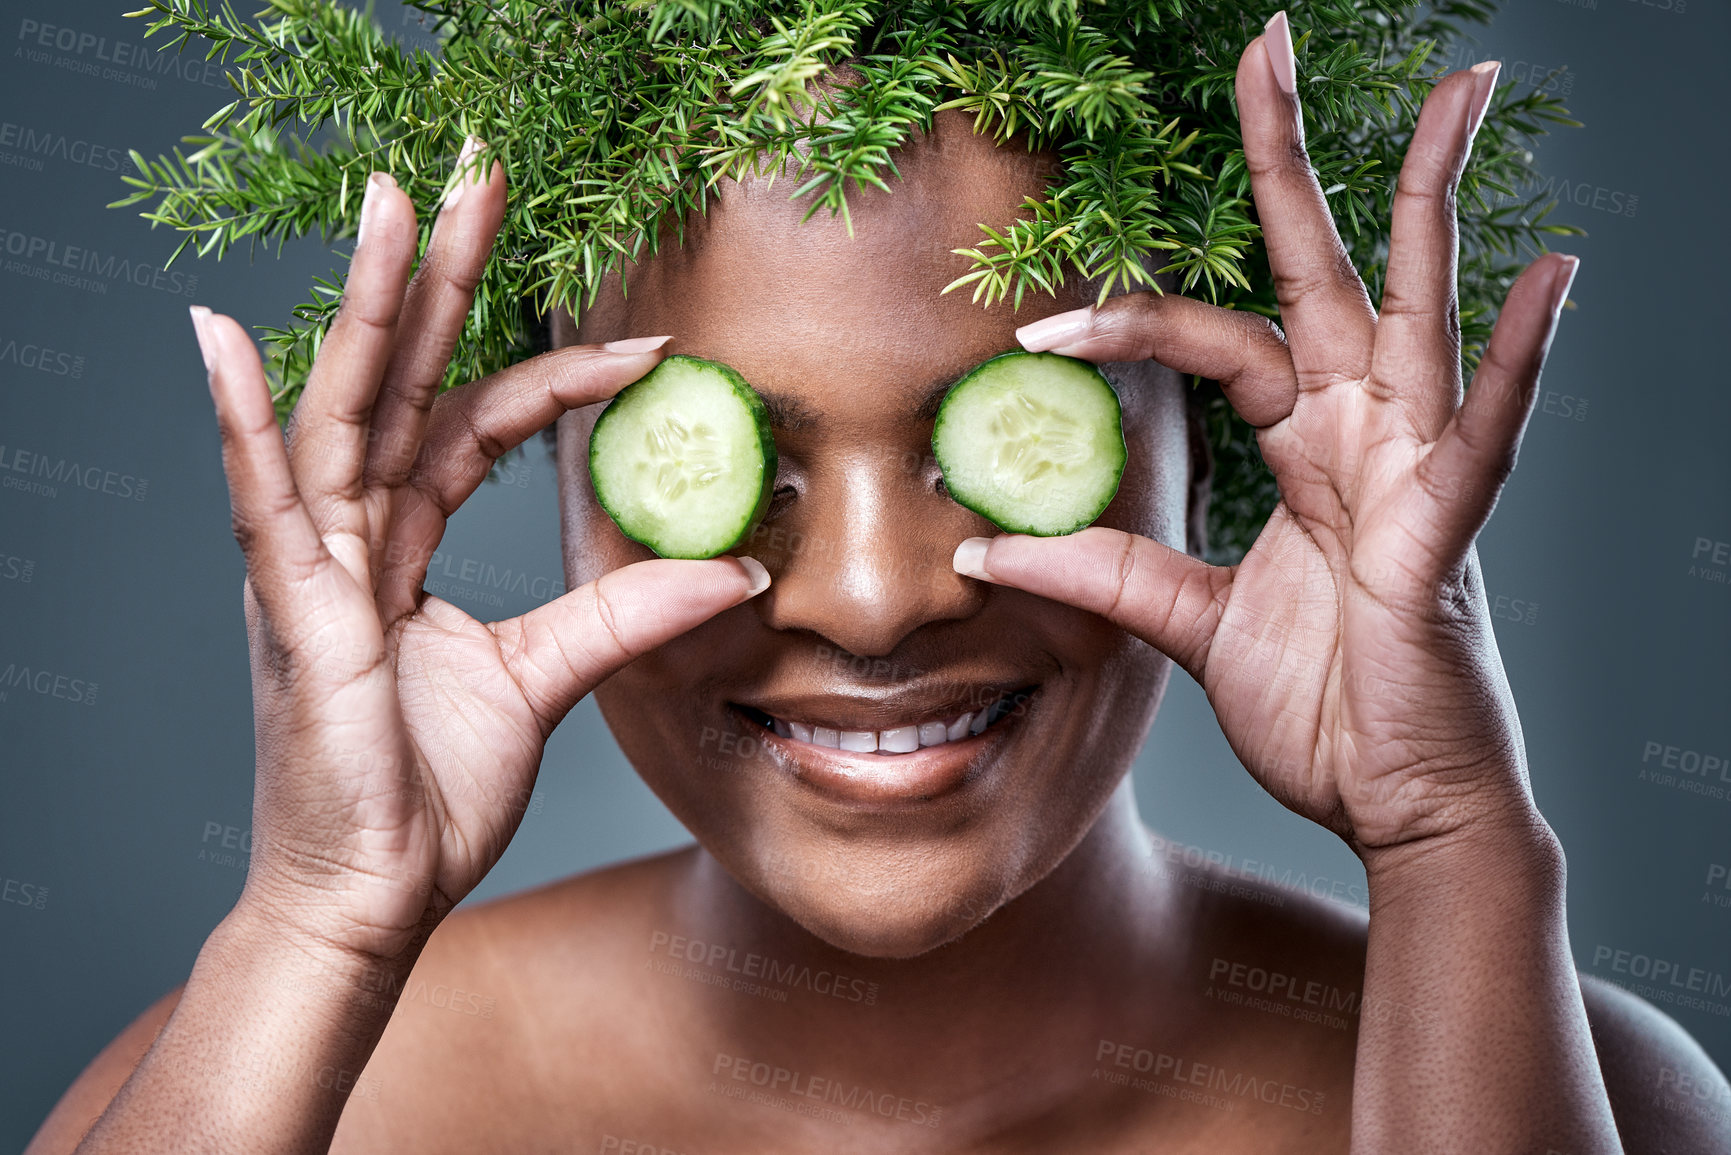 Buy stock photo Shot of a woman holding cucumber slices over her eyes while wearing a leaf wreath